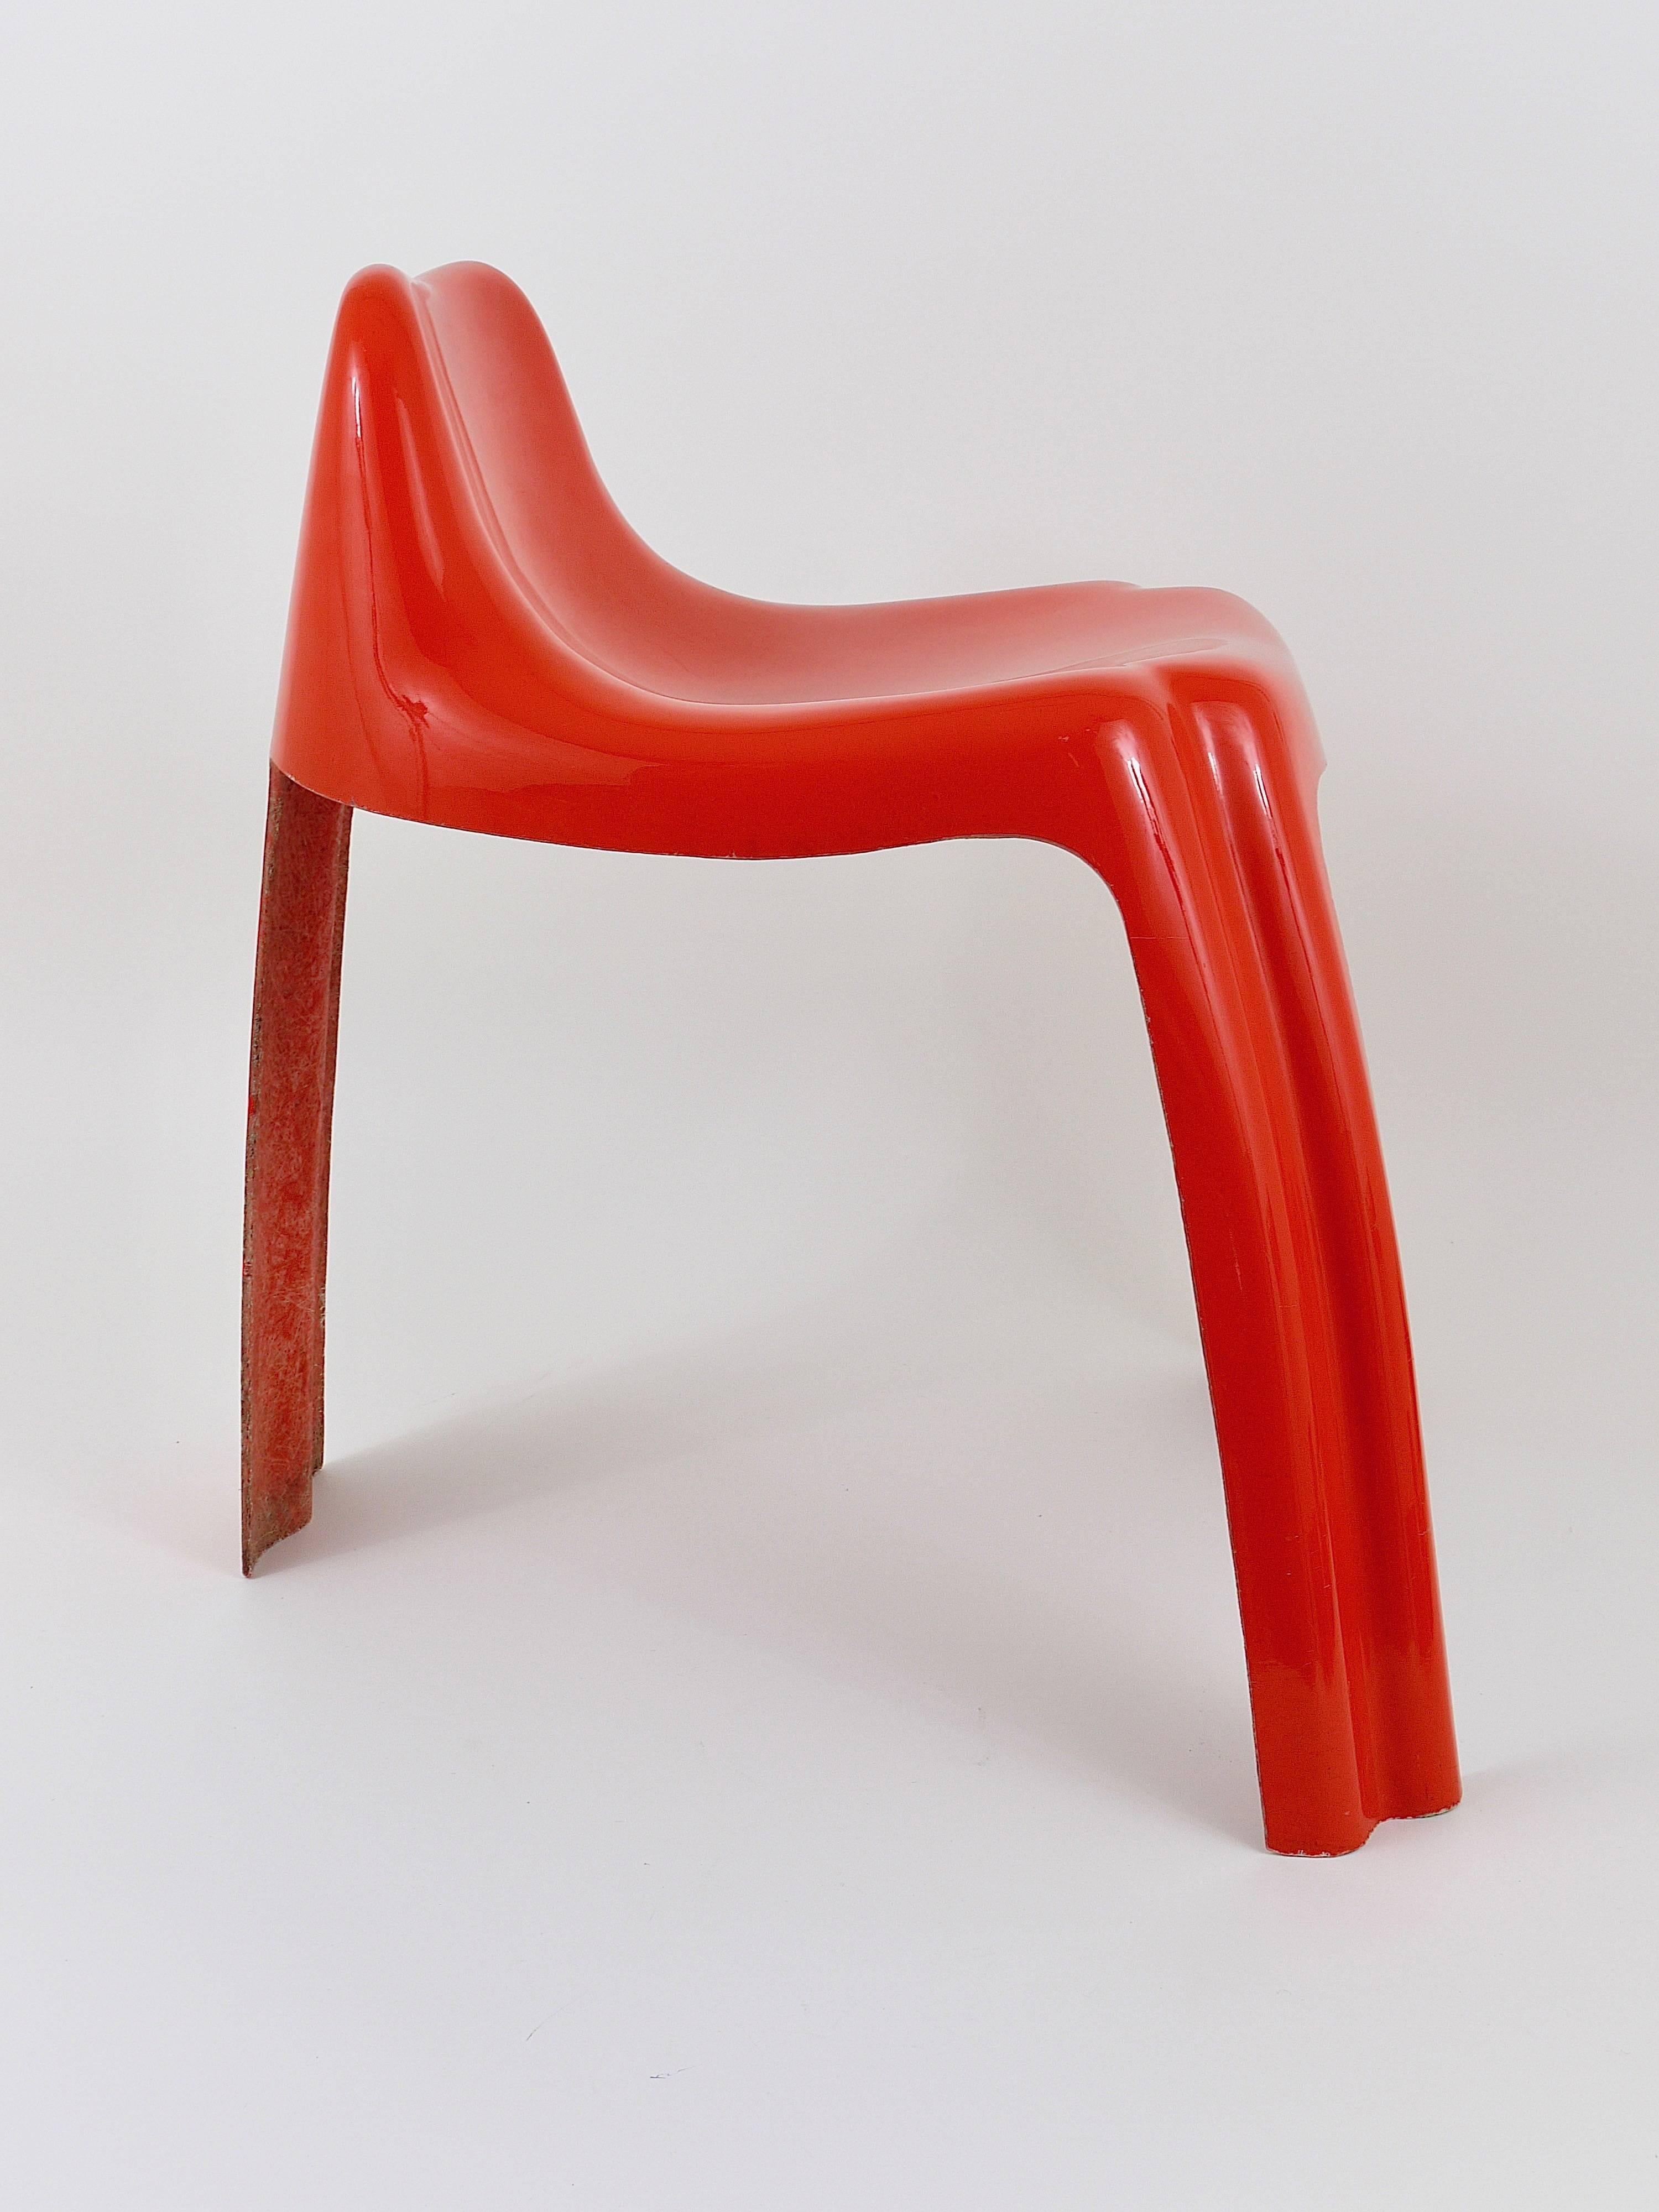 Orange Fiberglass Chair Ginger by Patrick Gingembre, Paulus, France, 1970s In Excellent Condition For Sale In Vienna, AT